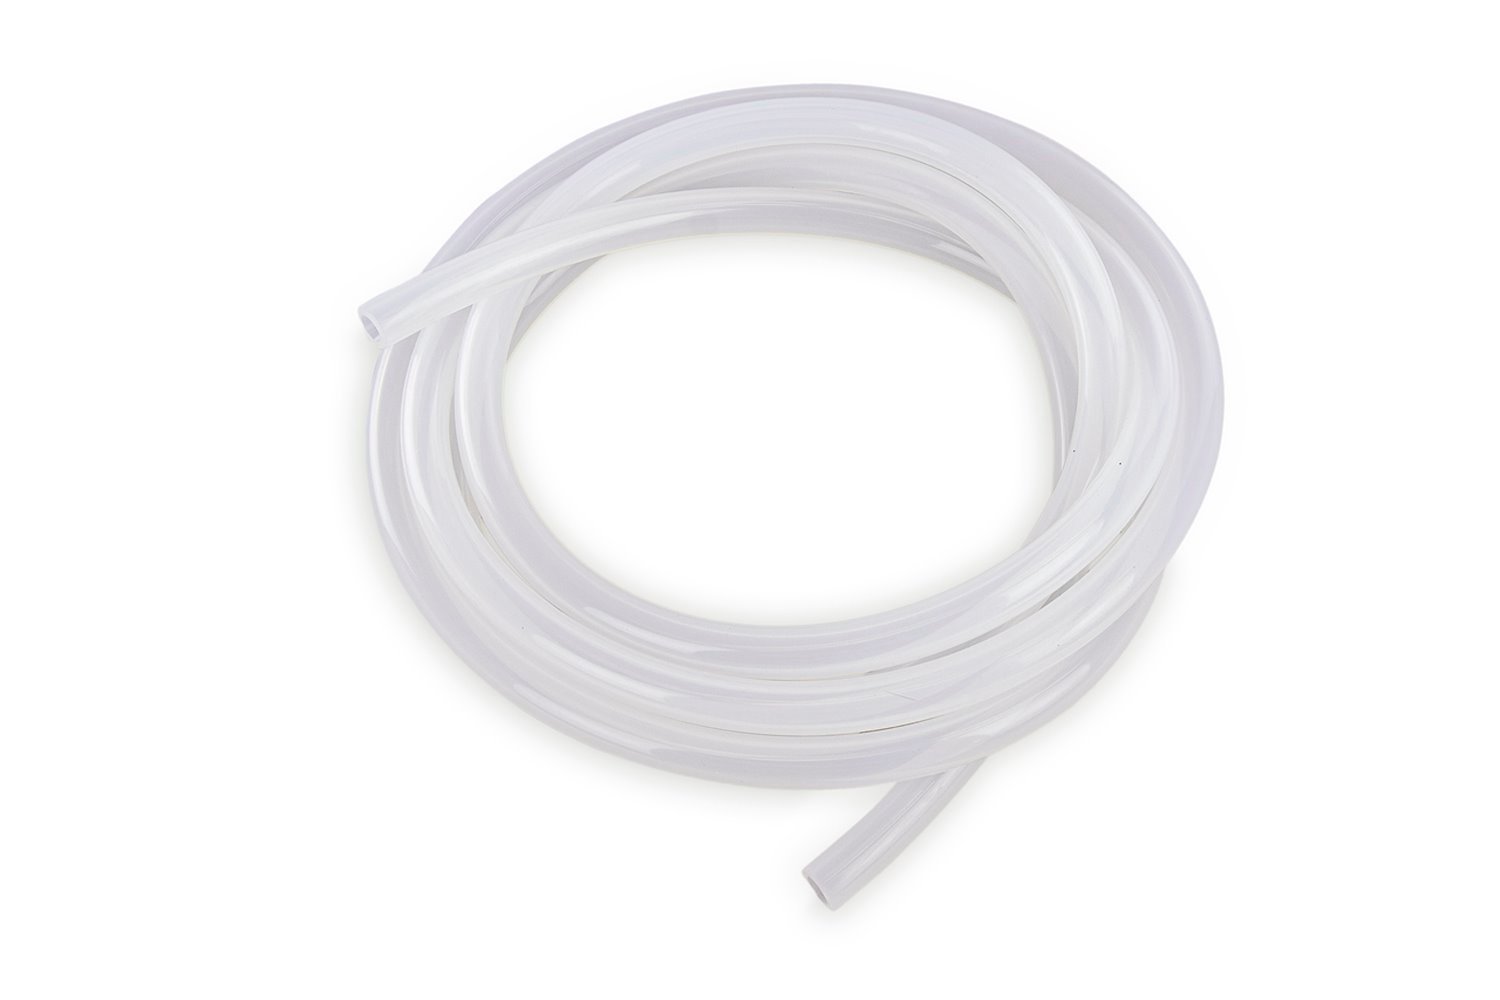 HTSVH127-CLEARx10 High-Temperature Silicone Vacuum Hose Tubing, 1/2 in. ID, 10 ft. Roll, Clear